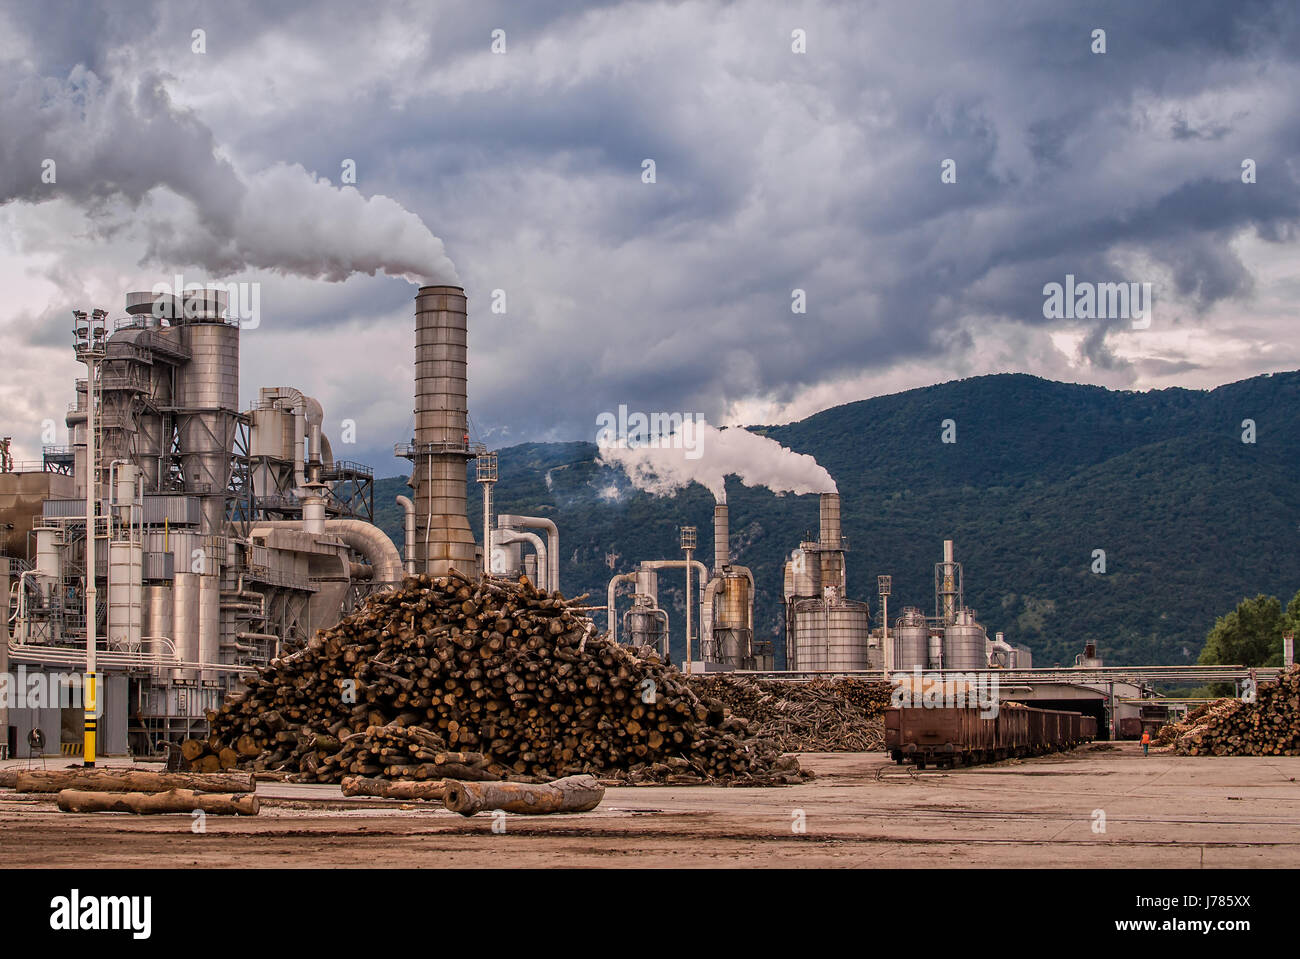 Lumber industry. Smokestacks, silos, rail cars and trunks.  Chemical plant of a furniture factory Stock Photo